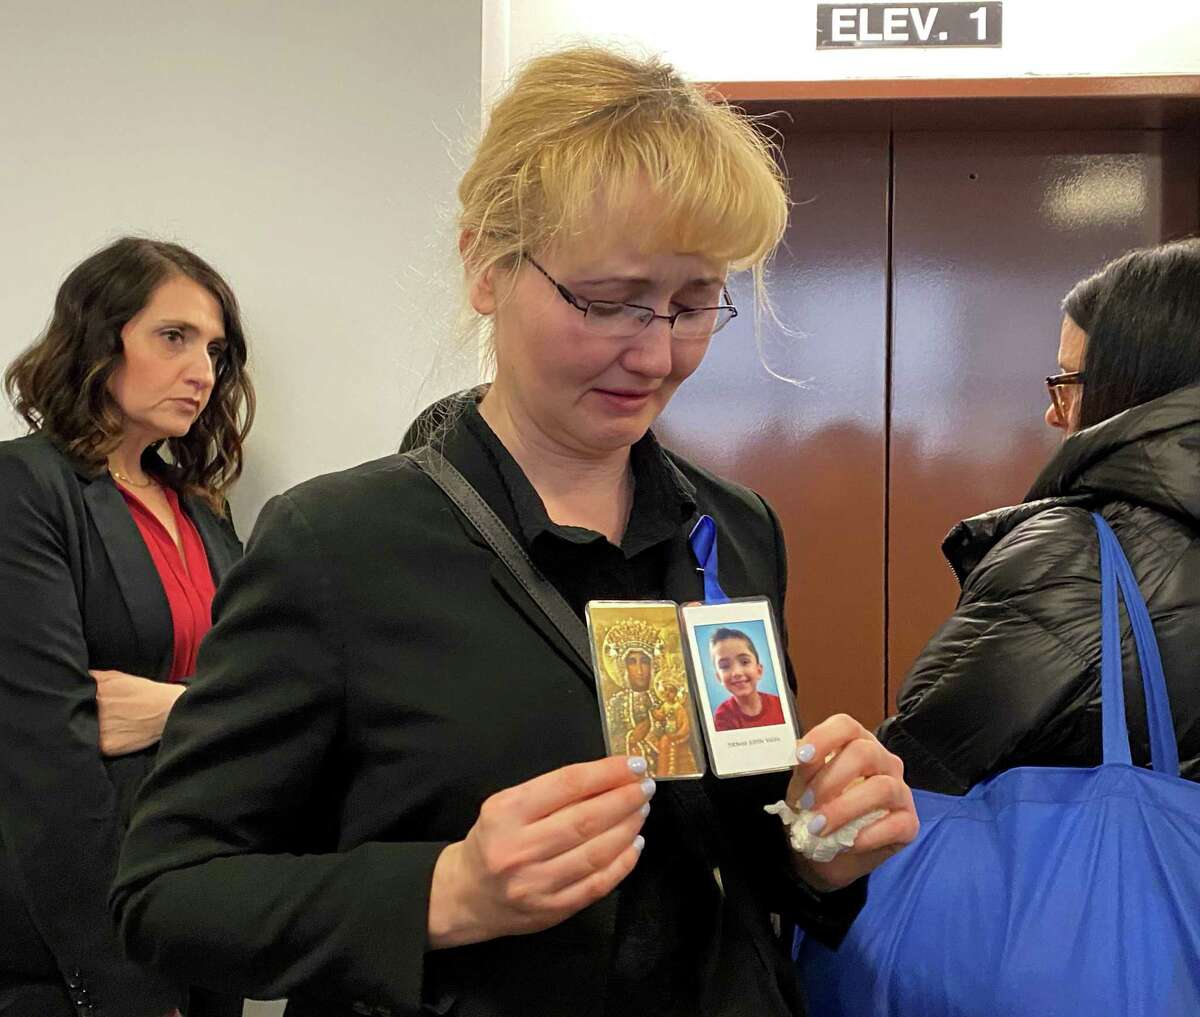 Riverhead, N.Y.: Justyna Zubko-Valva is pictured with a photo of her son Thomas Valva at the Arthur M. Cromarty Criminal Court Complex in Riverhead, New York on Feb. 6, 2020. Thomas Valva's father, Michael Valva, and his father's girlfriend, Angela Pollina, were arrested on Jan. 24, 2020. They are charged with second-degree murder of Thomas Valva, 8 years-old.